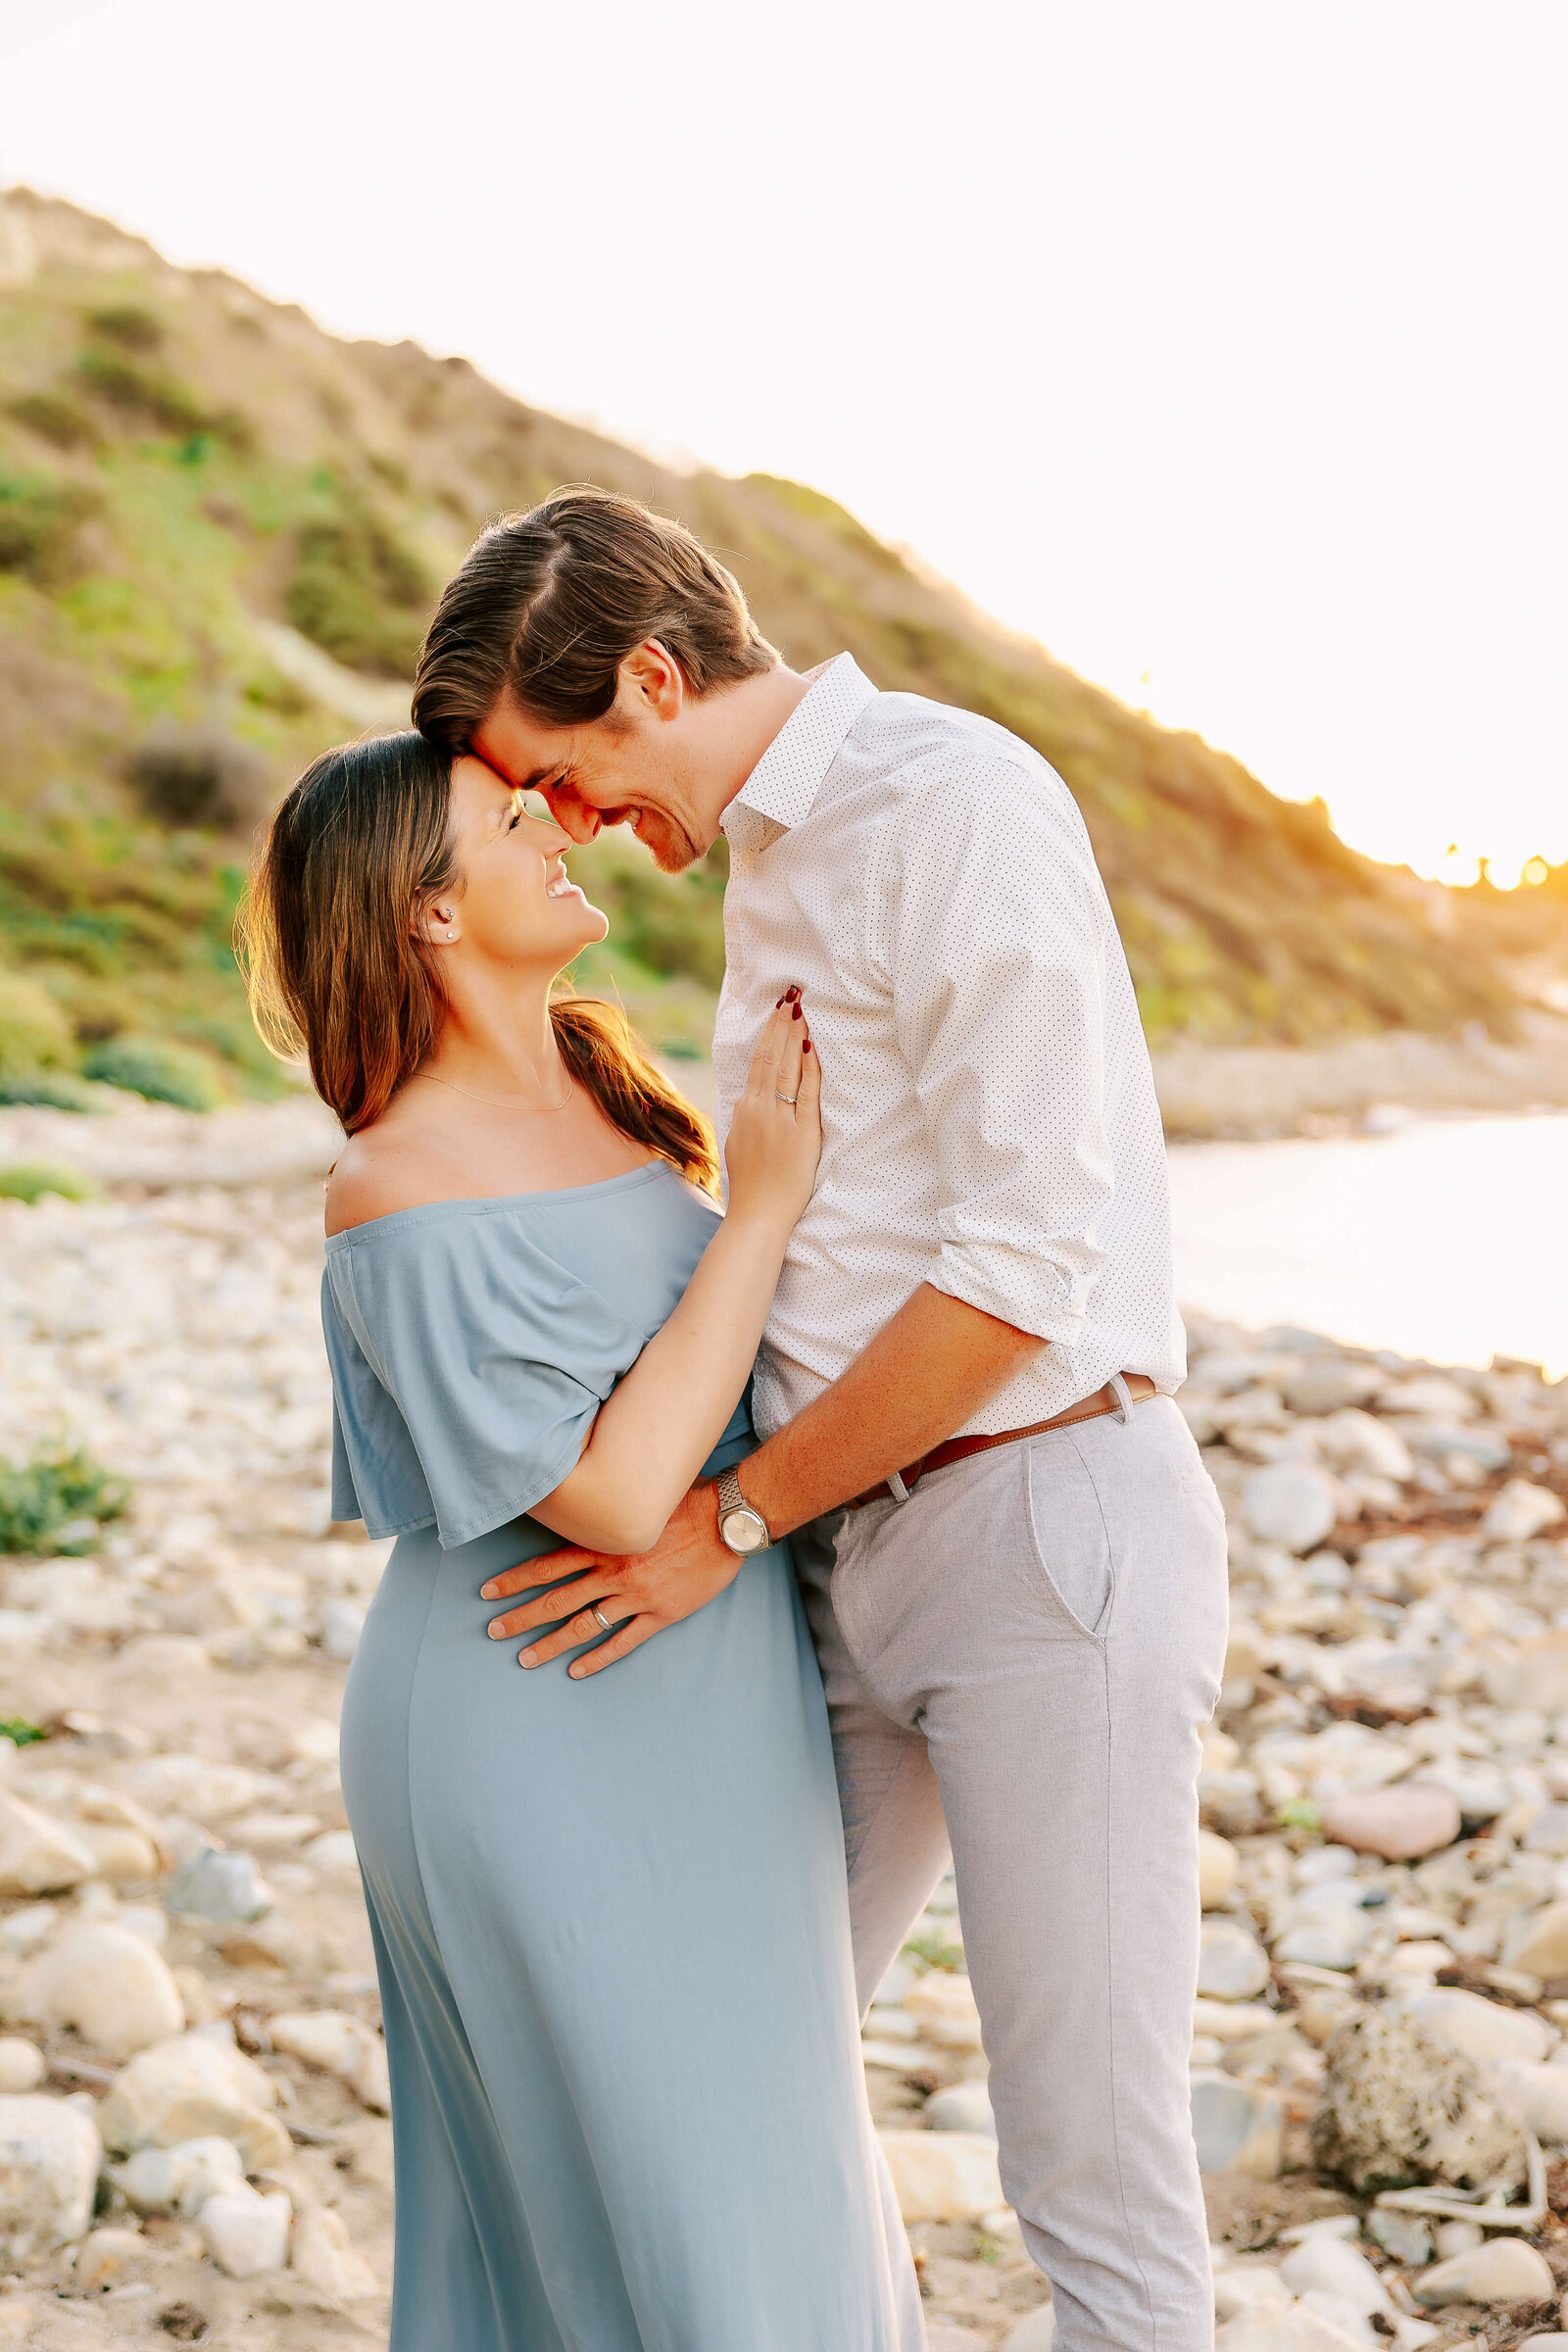 Couple embraced with foreheads touching on rocky beach in Los Angeles by Ashley Nicole Photography.